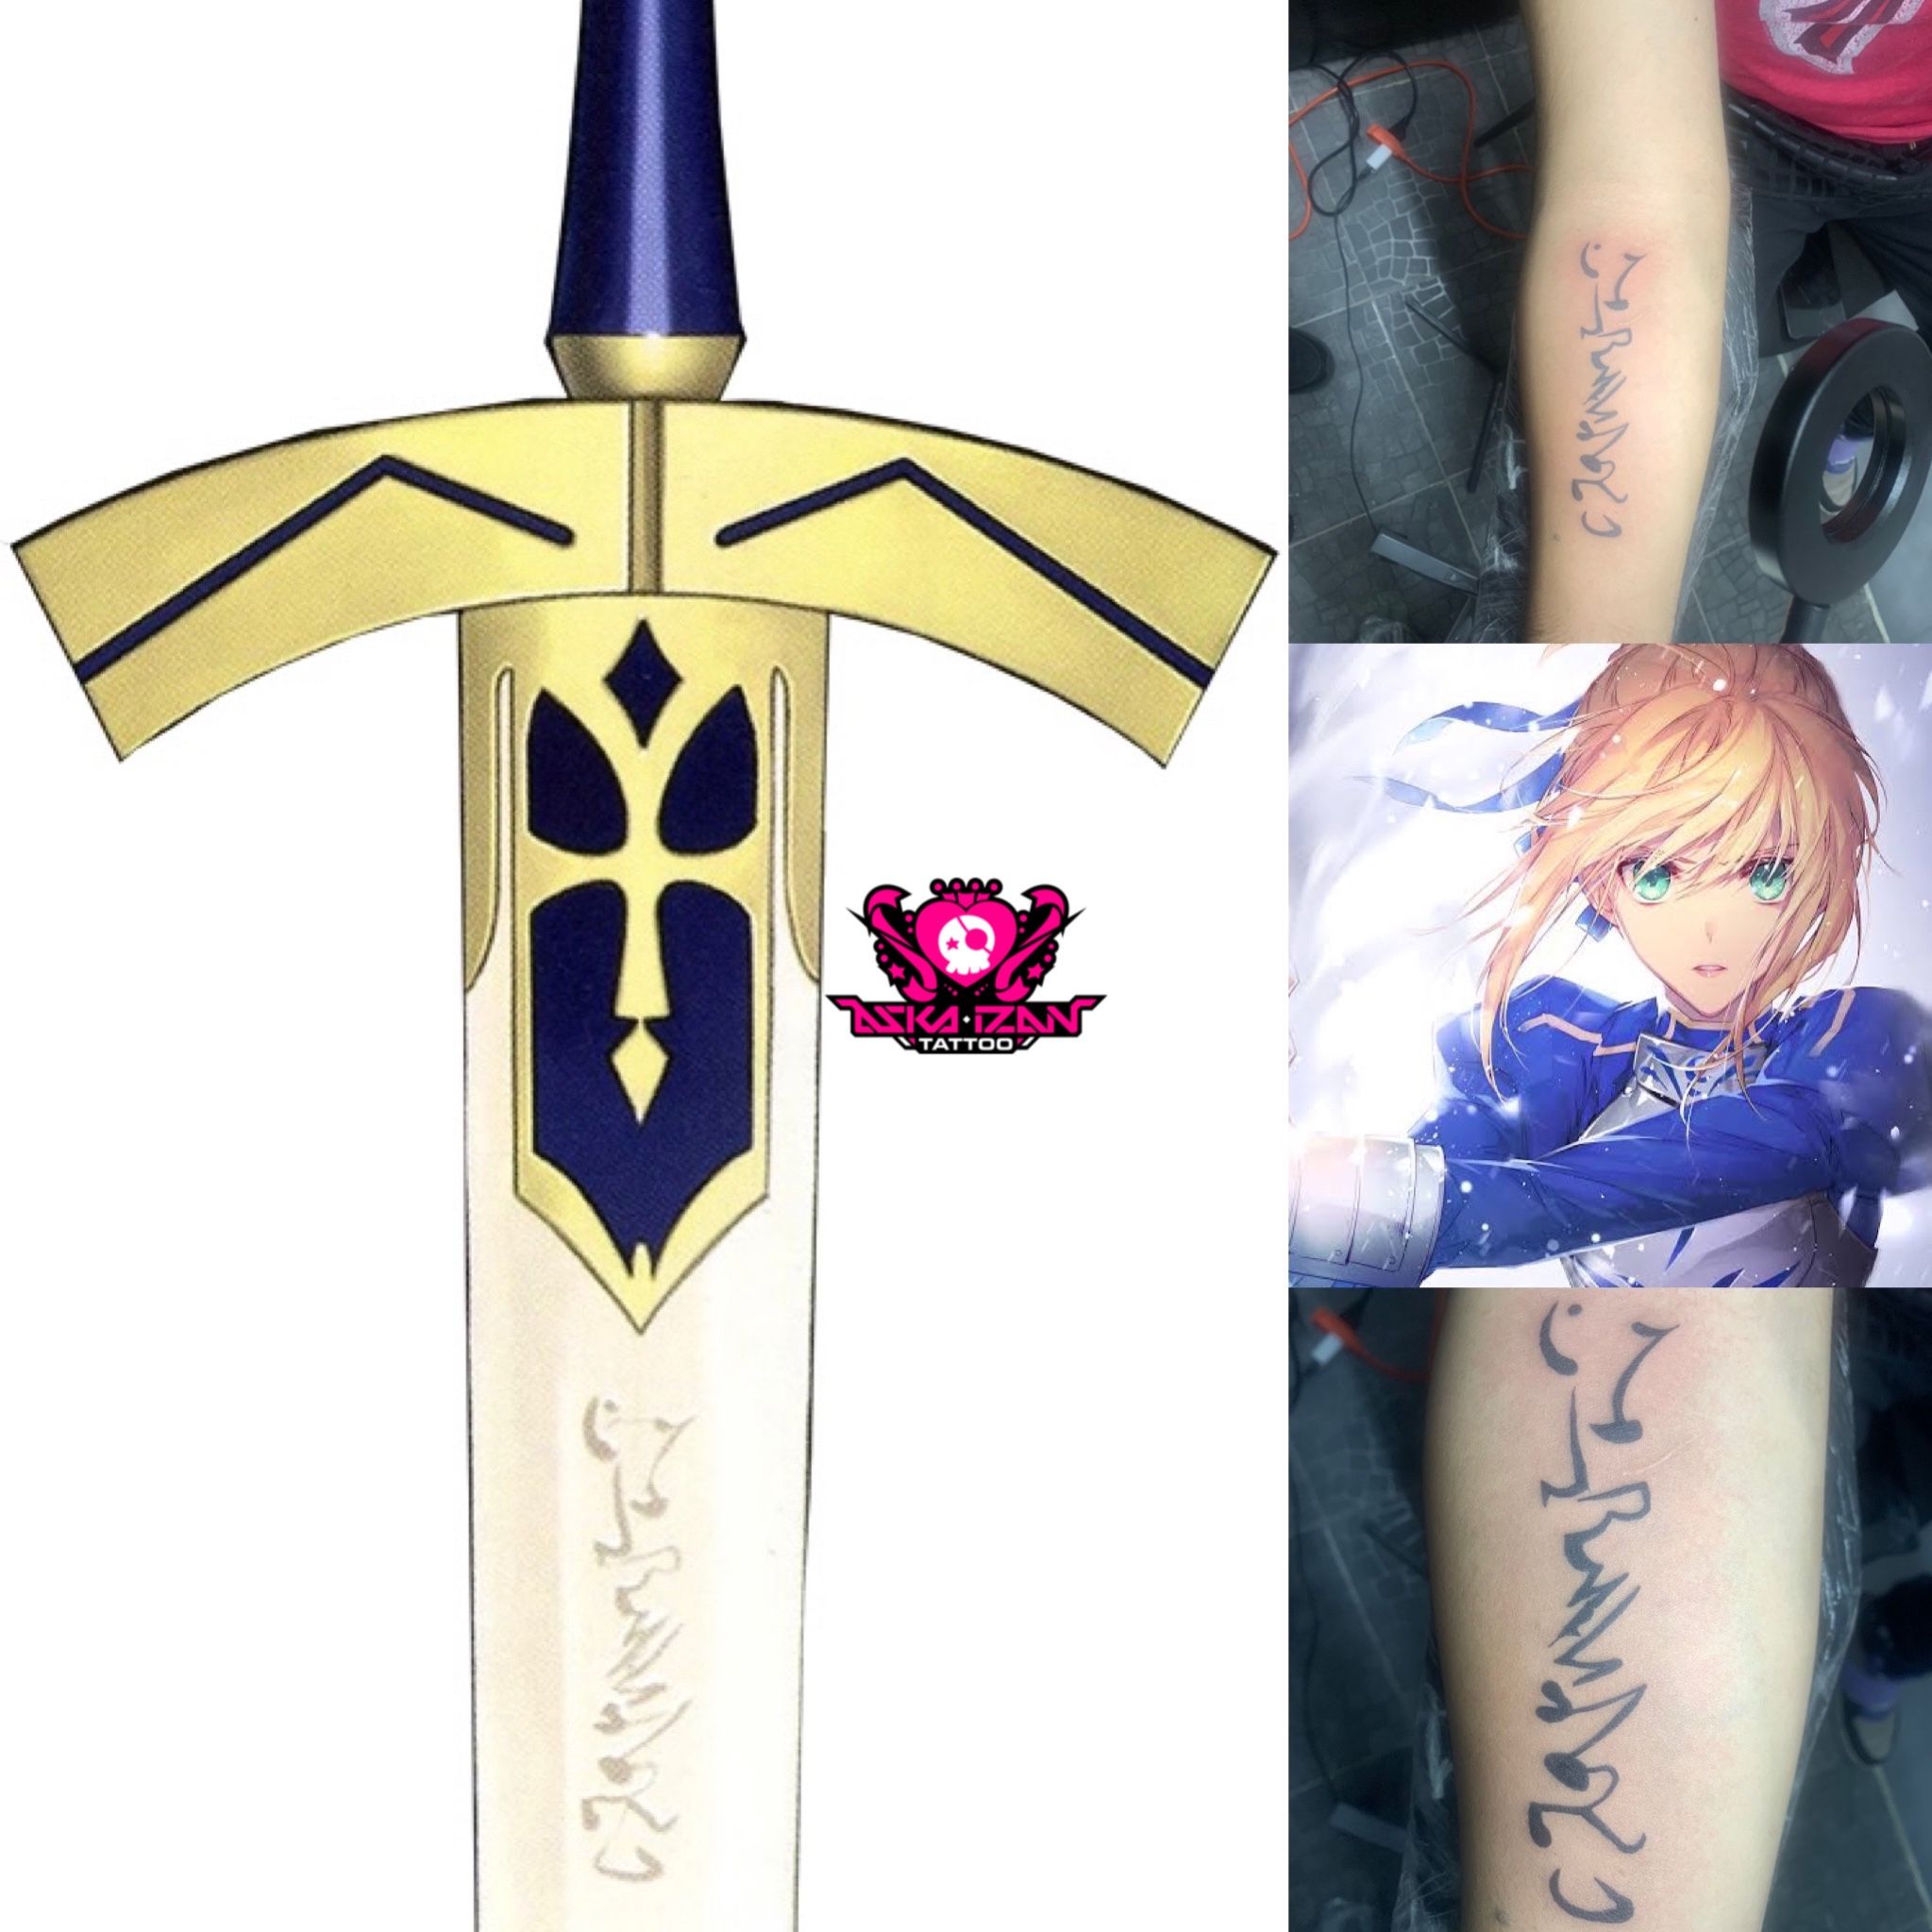 Fate Grand Order Fate Stay Night Fate Apocrypha Master Command Spell Tattoo  Sticker Cosplay Accessory Prop #Sponsored… | Cool symbols, Fate tattoo, Symbolic  tattoos